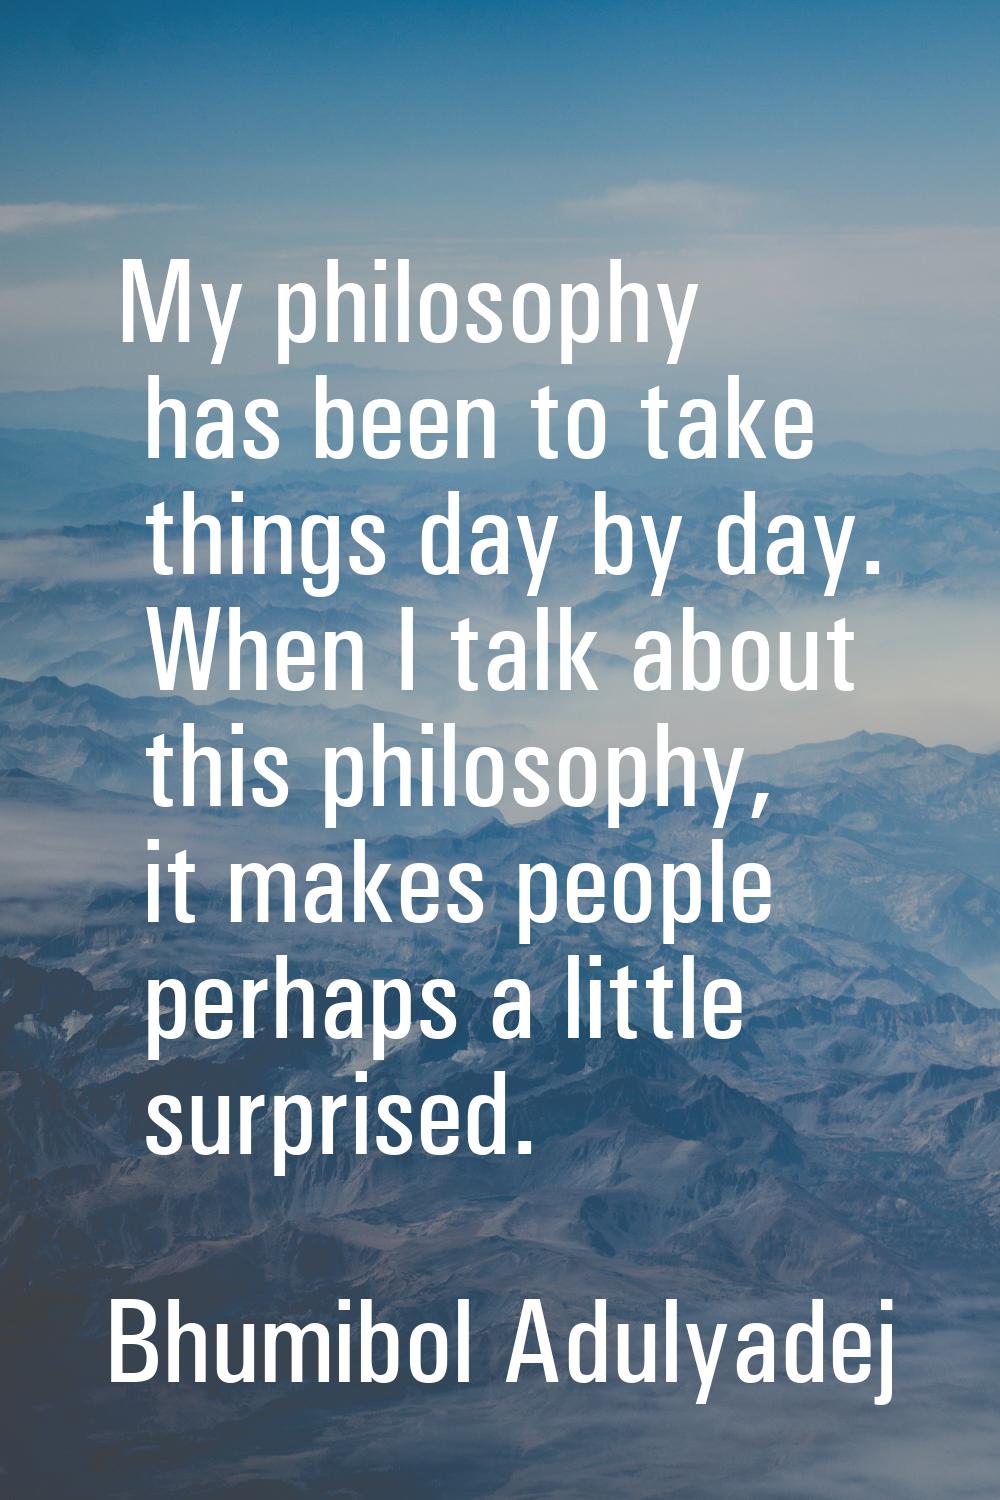 My philosophy has been to take things day by day. When I talk about this philosophy, it makes peopl